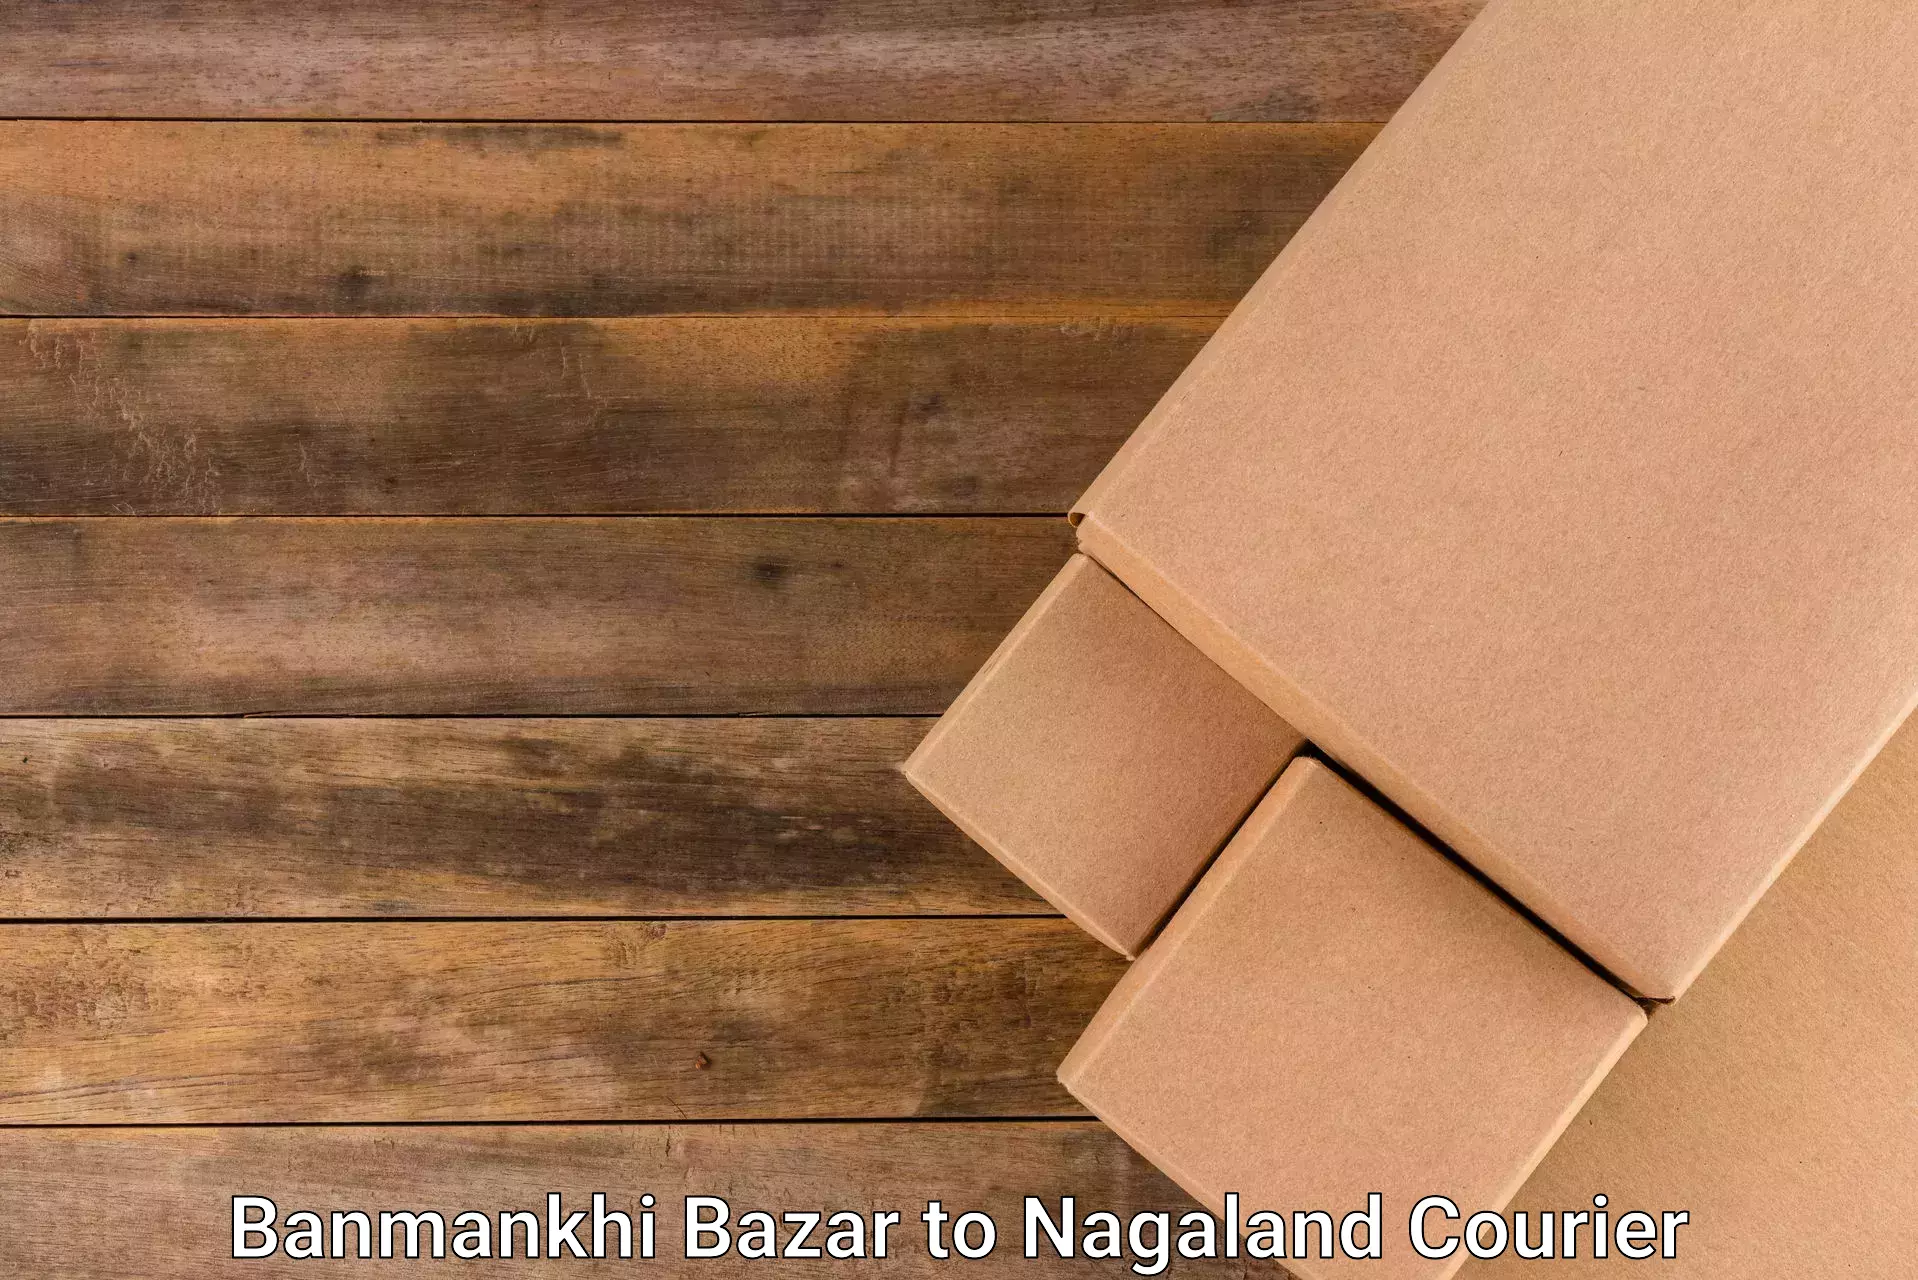 Local delivery service Banmankhi Bazar to Nagaland